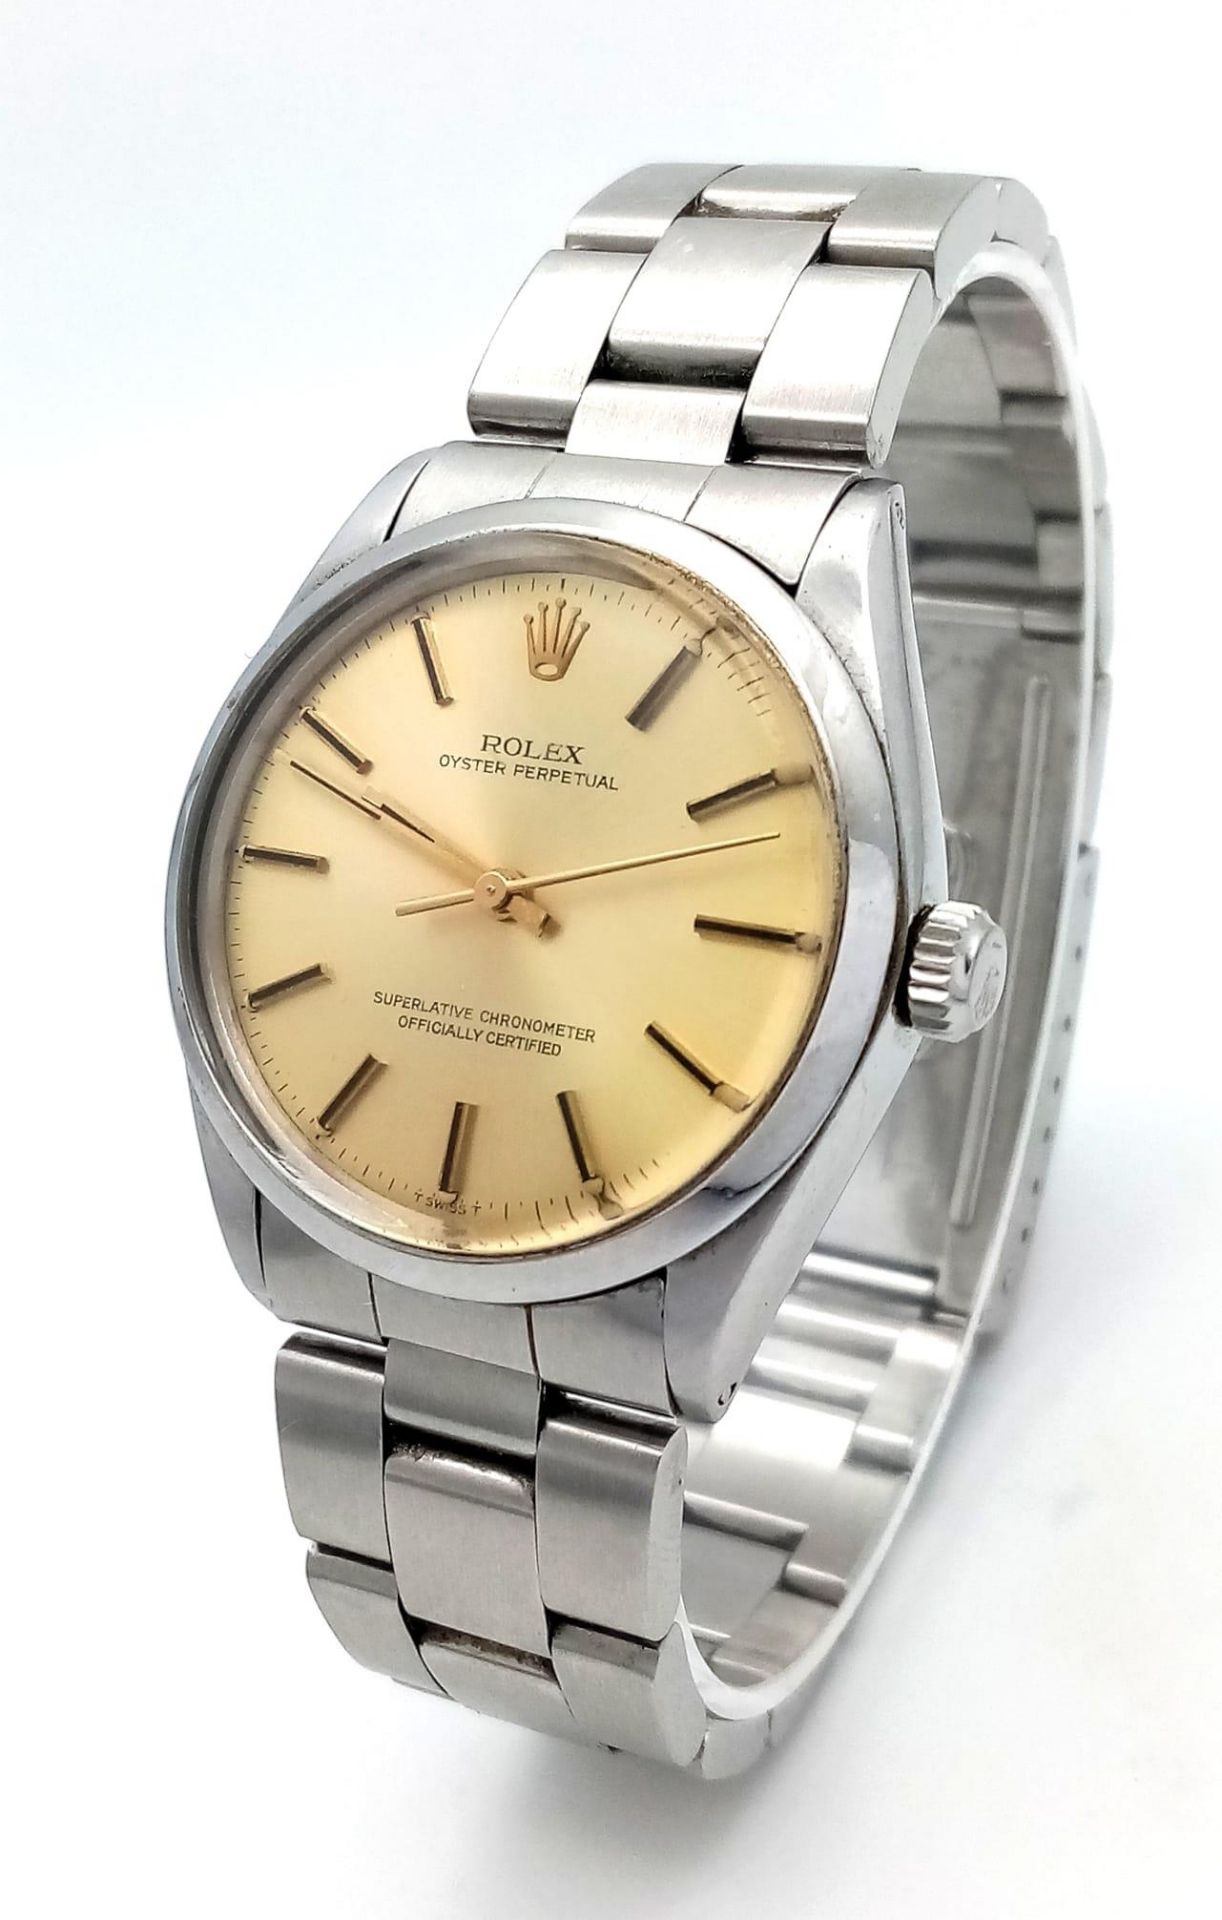 A Vintage Rolex Oyster Perpetual Automatic Gents Watch. Stainless steel bracelet and case - 34mm.